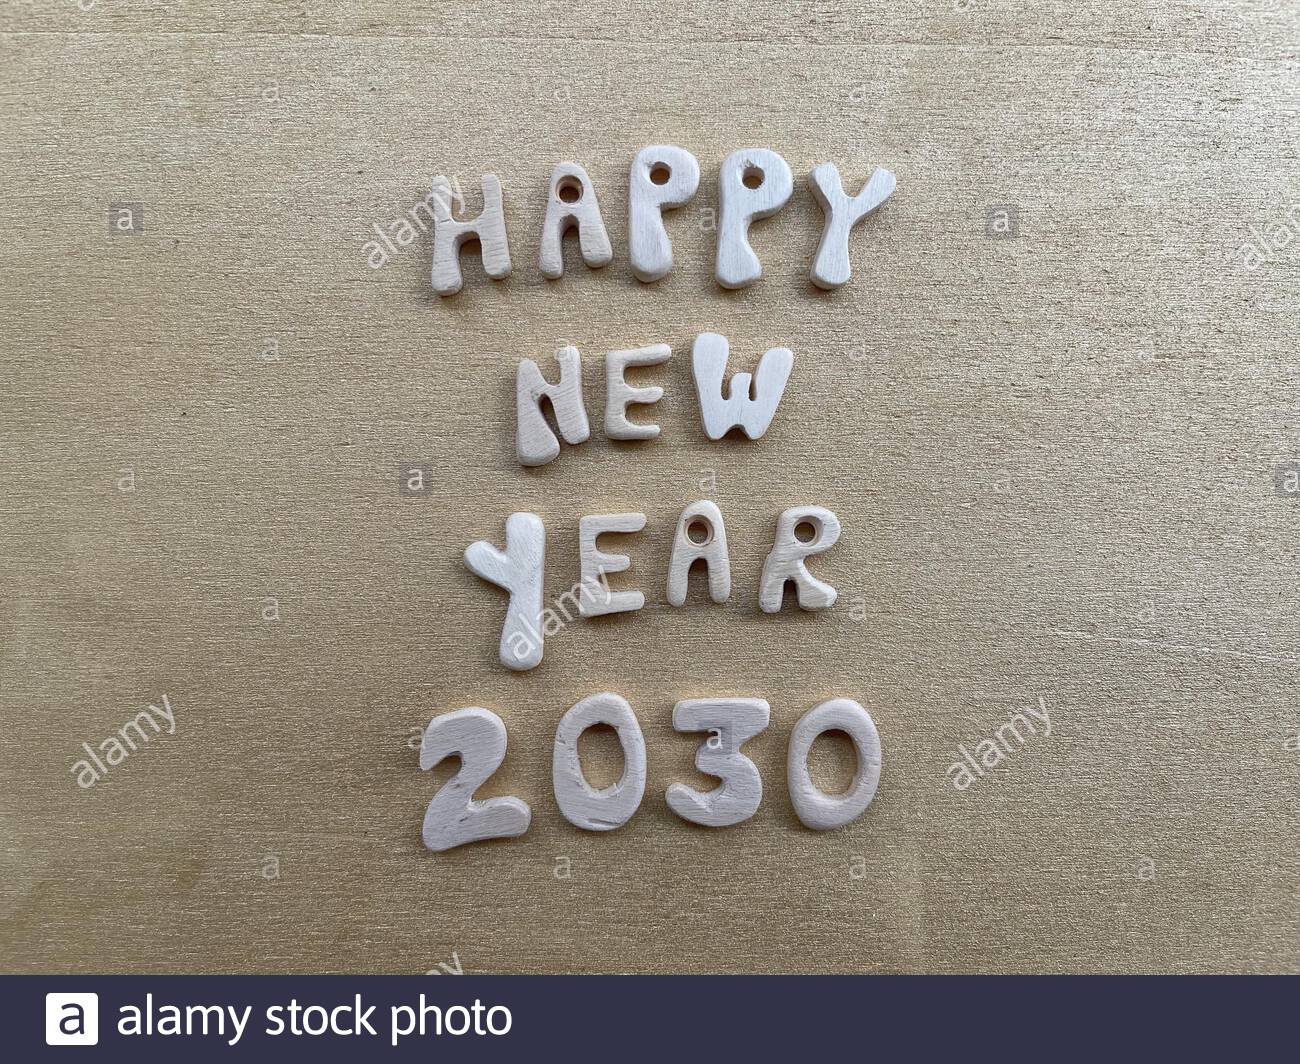 Happy New Year 2030 with wooden letters and numbers Stock Photo